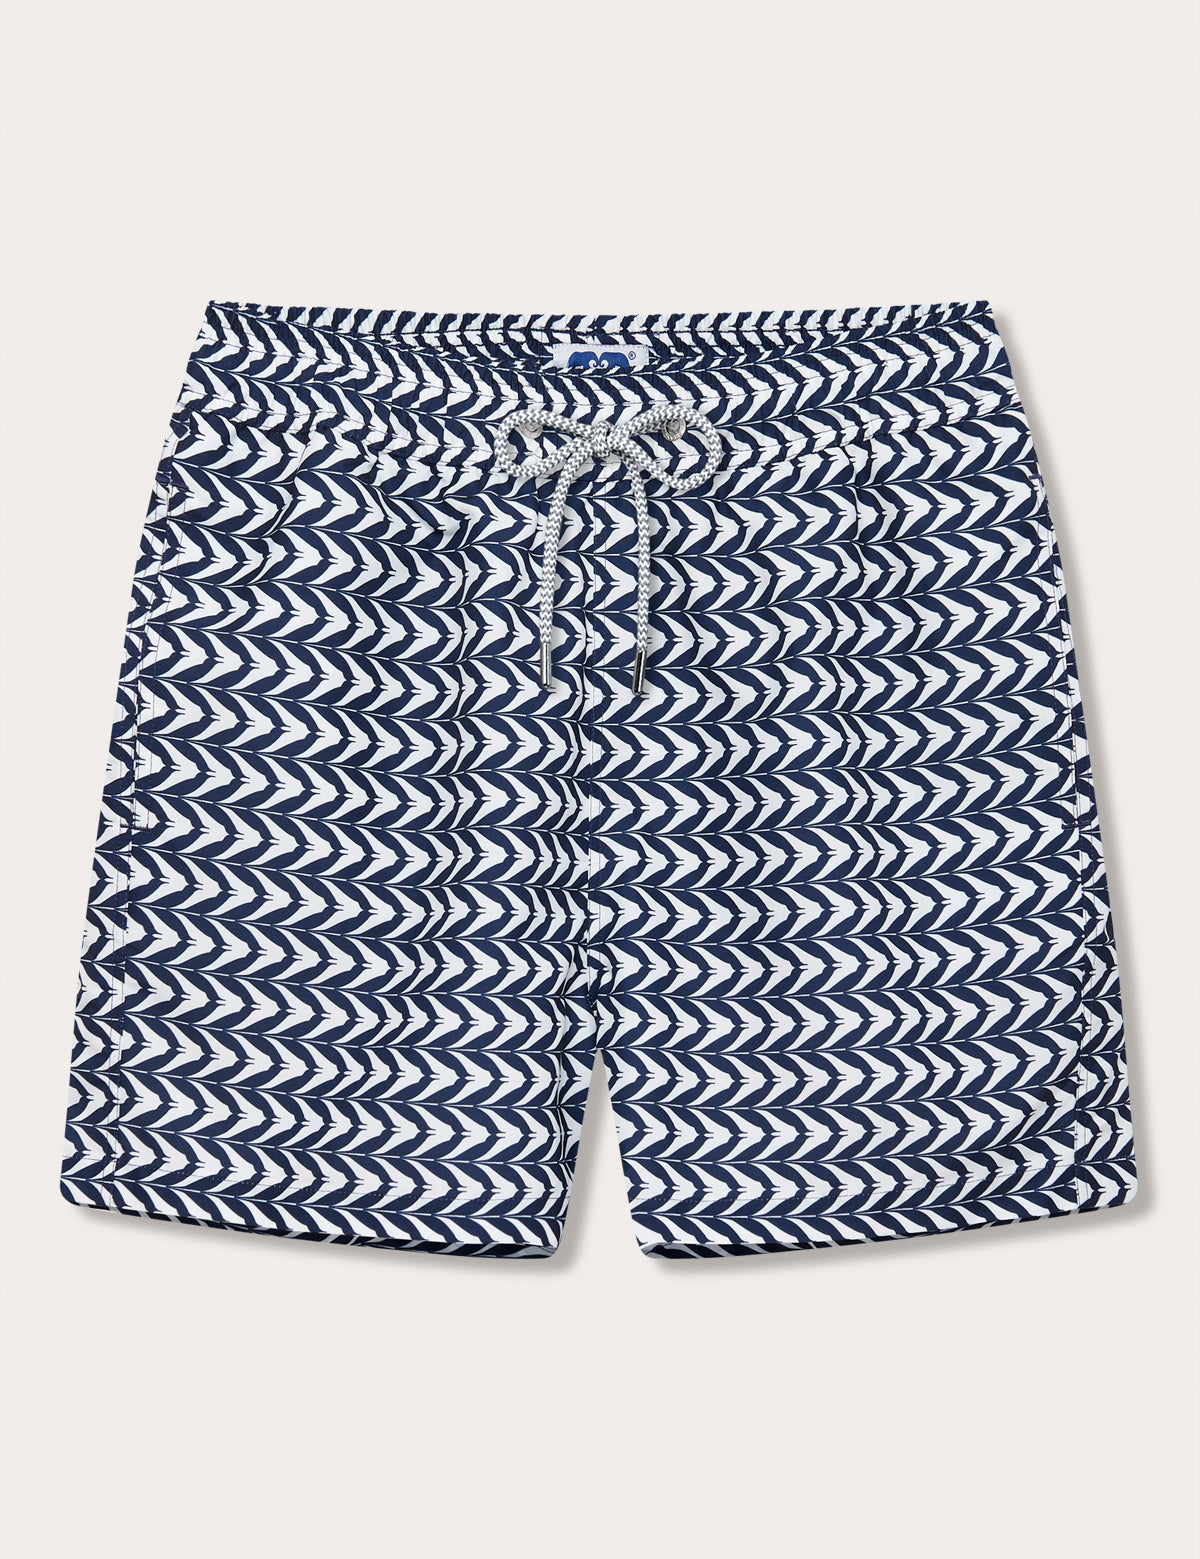 Men's Feather Icing Staniel Swim Shorts made from 100% recycled, quick-drying fabric.